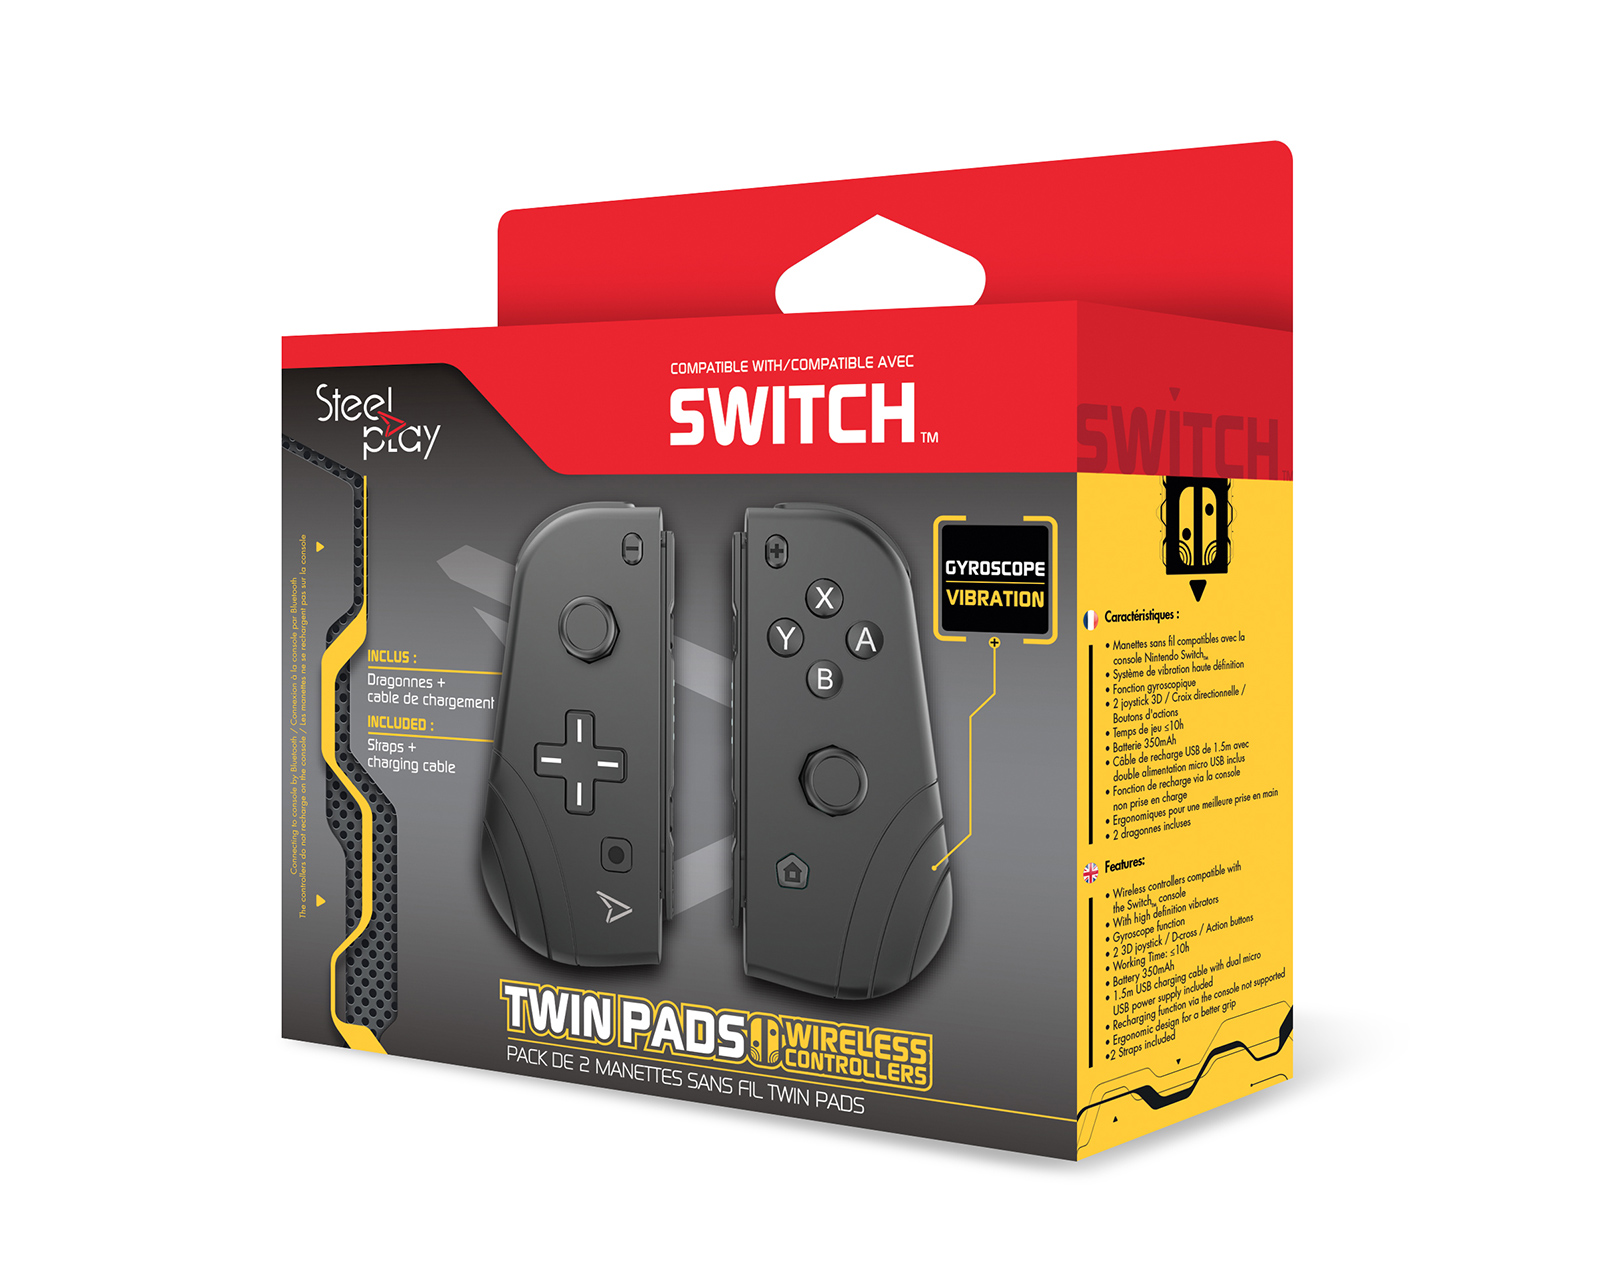 2 controllers nintendo switch